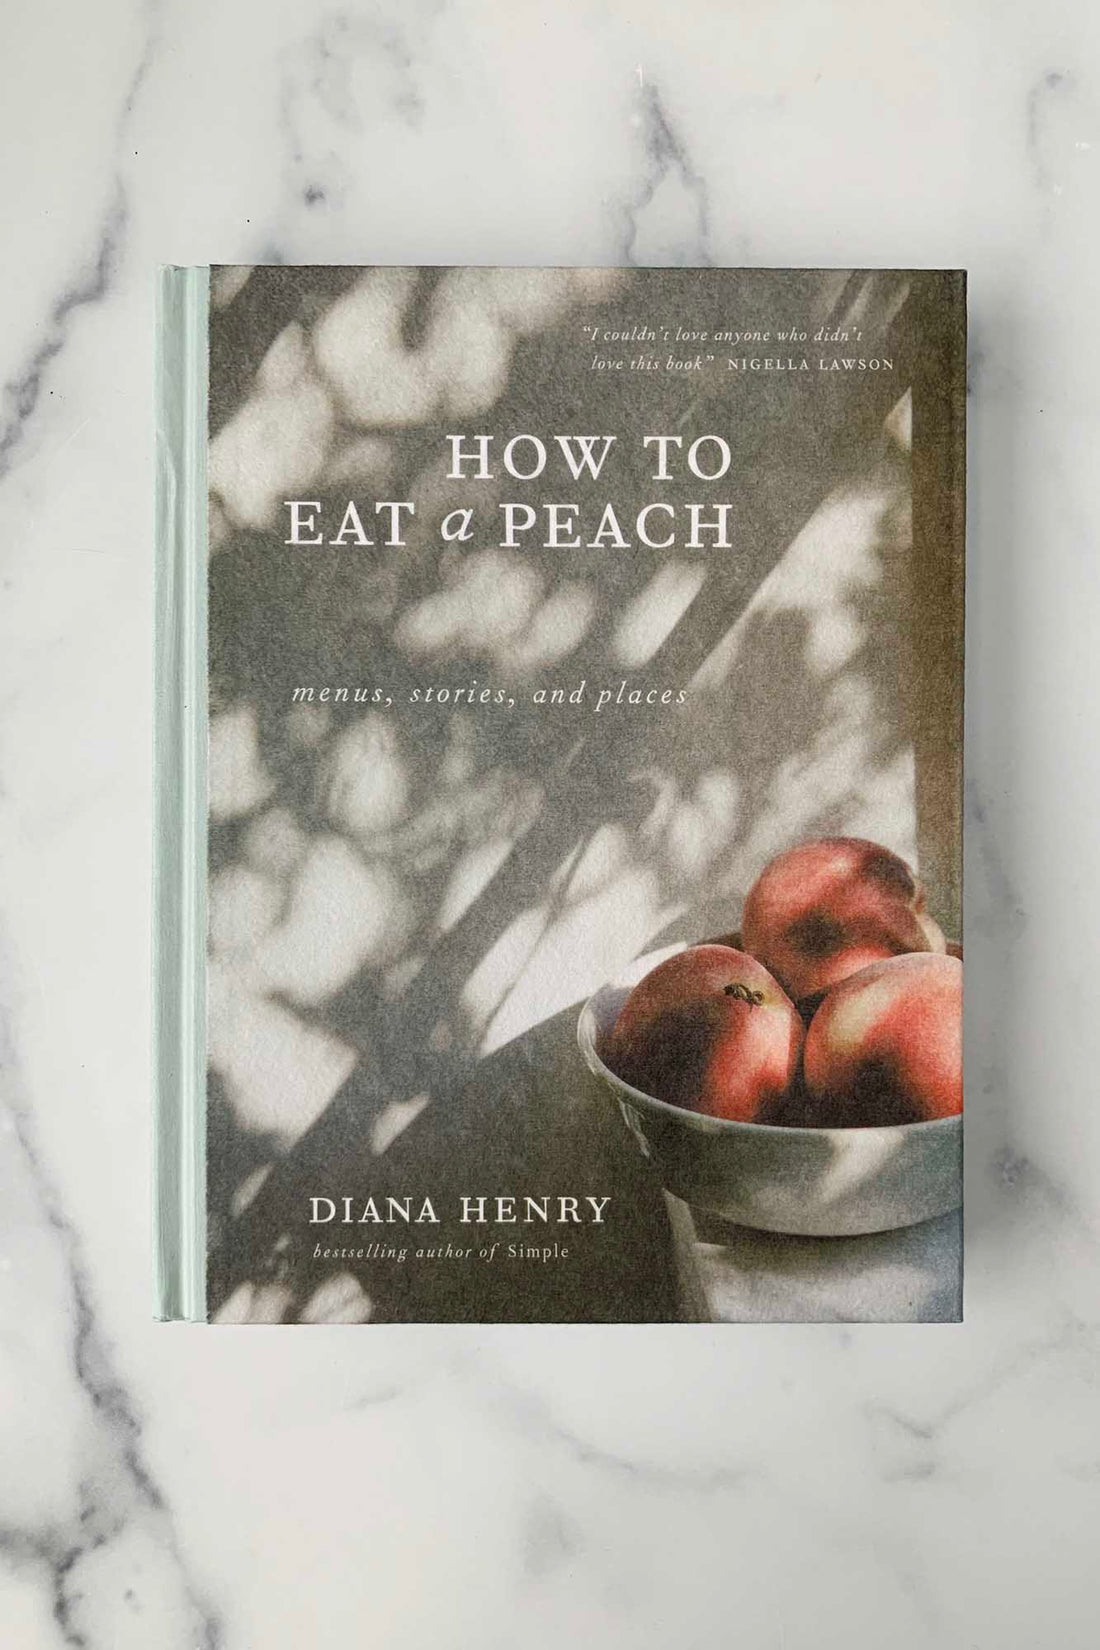 How to Eat a Peach